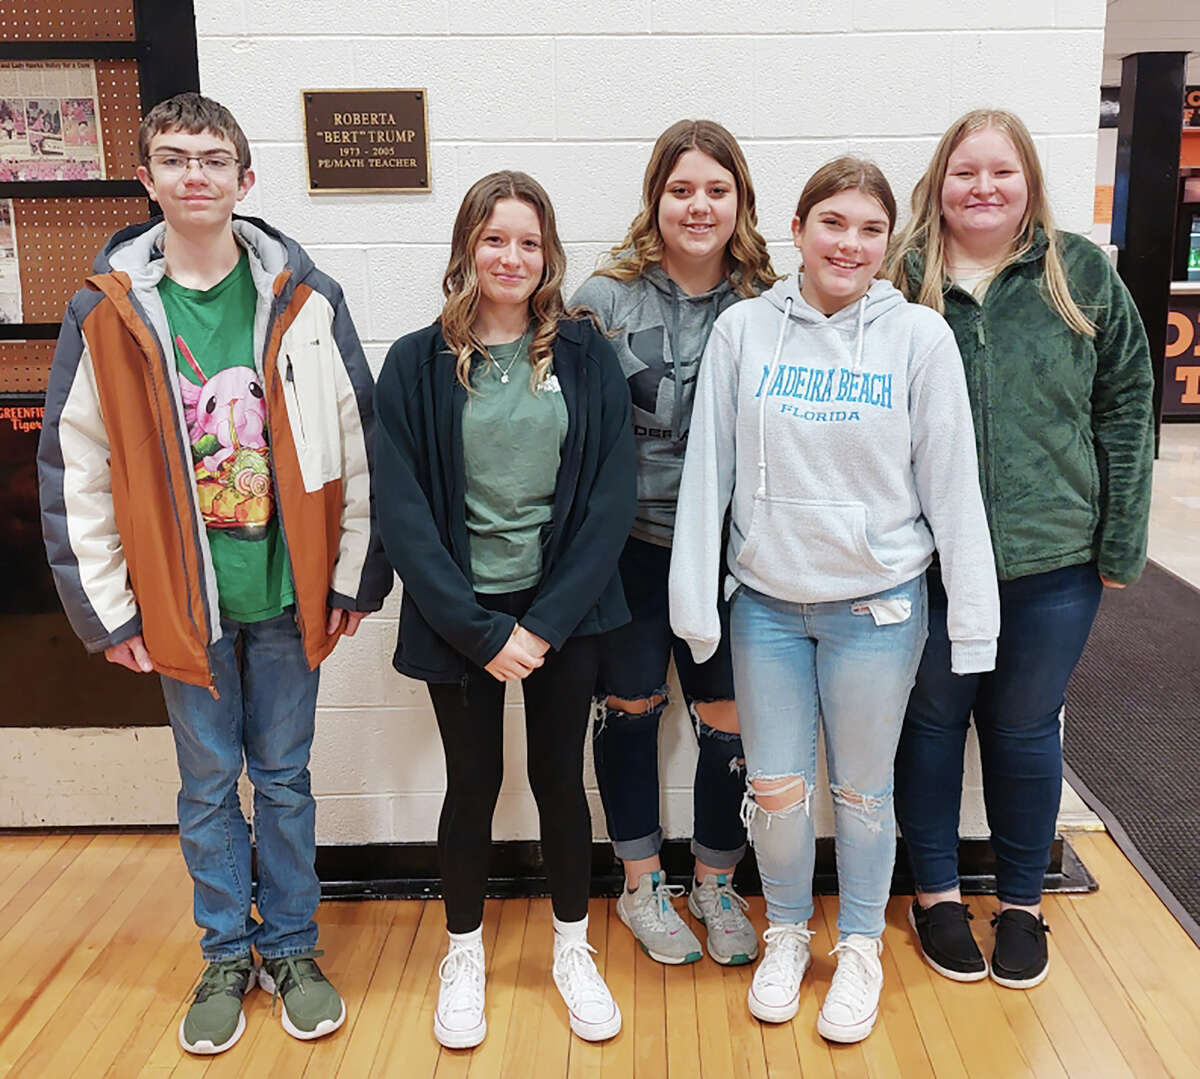 Members of the Bluffs FFA Greenhand team recently attended the Section 13 Agronomy Career Development Event. Greenhand team members included William Snyder (from left), Elaine Sprague, Cloie Fearneyhough, Bailee Long and Macee Lawson.